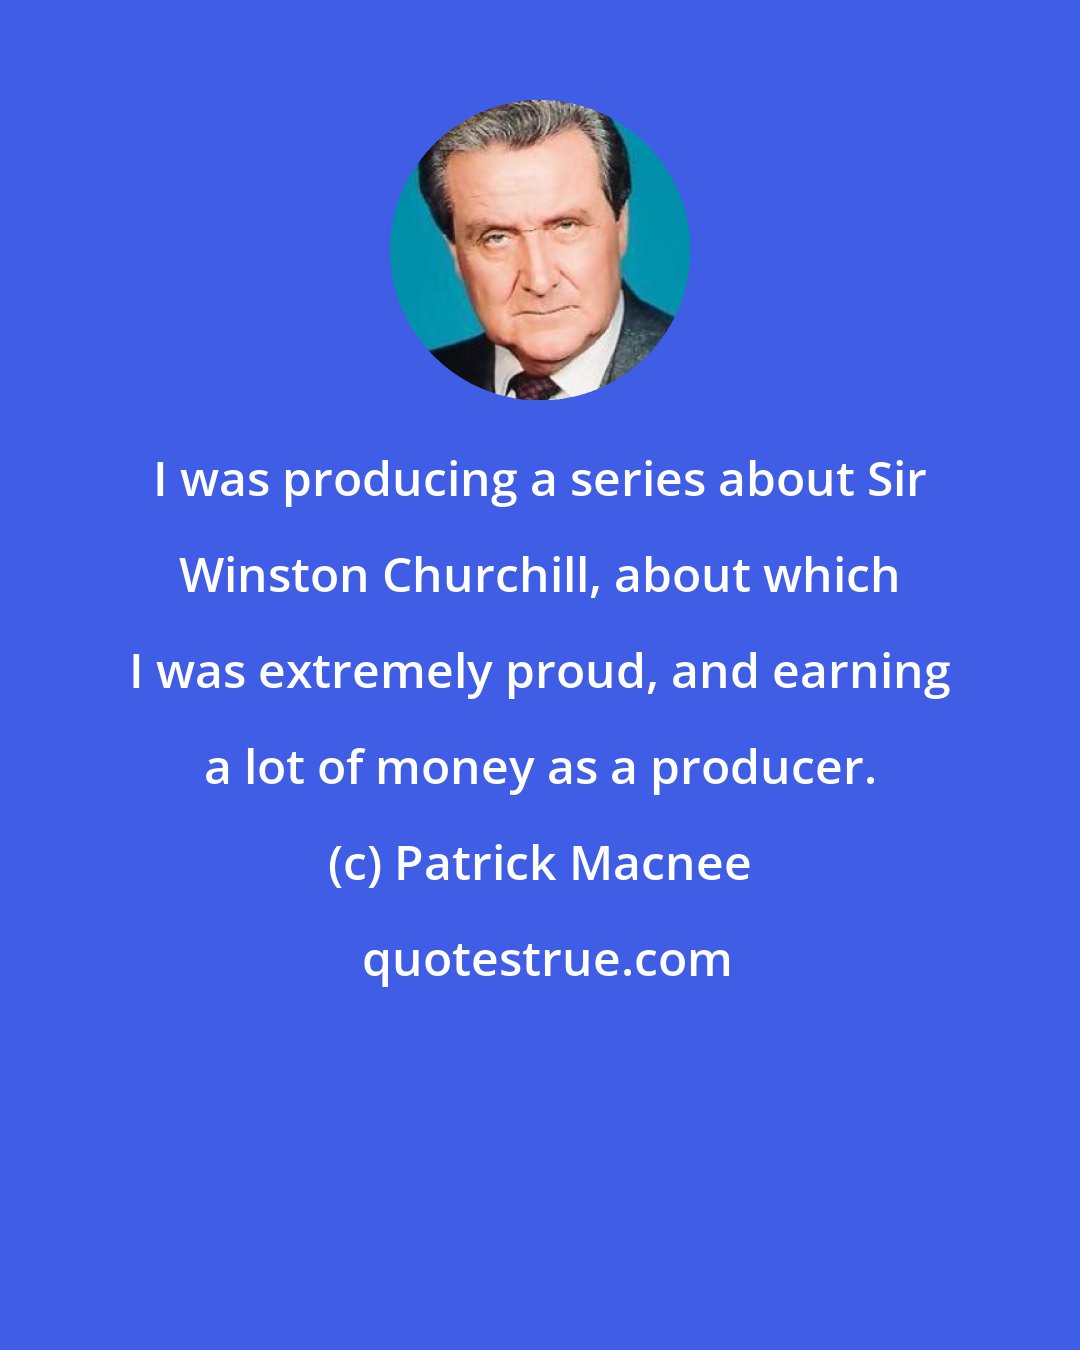 Patrick Macnee: I was producing a series about Sir Winston Churchill, about which I was extremely proud, and earning a lot of money as a producer.